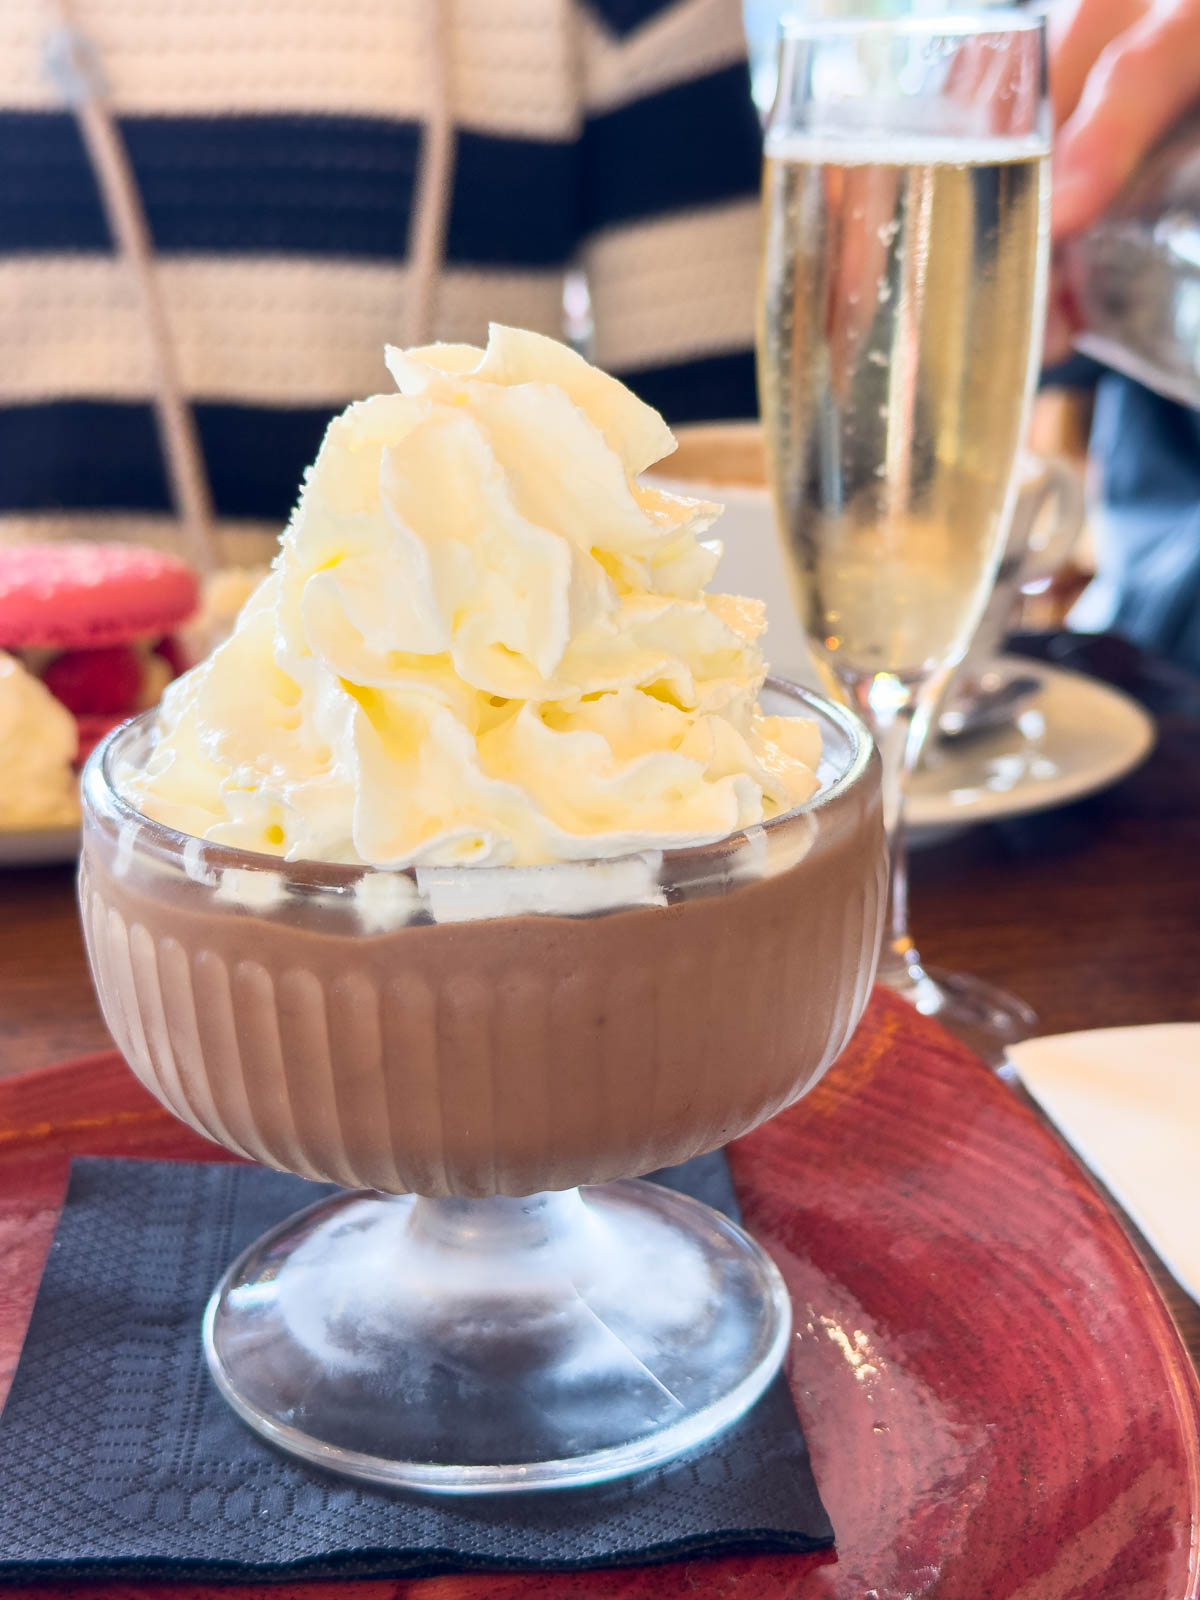 A dish filled with chocolate mousse has a giant swirl of whipped cream on top and a glass of champagne in the back.